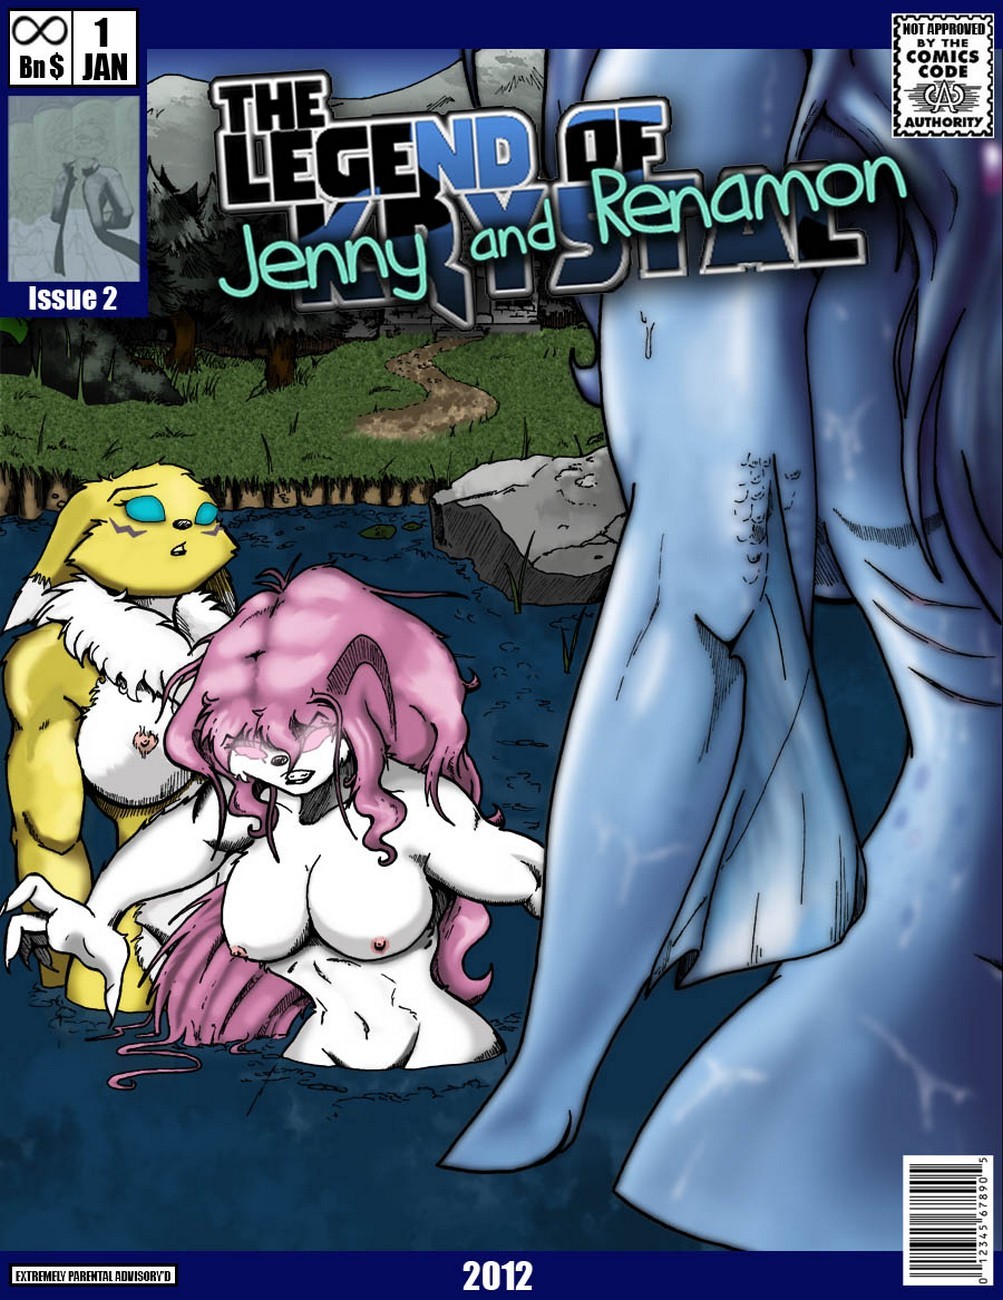 The Legend Of Jenny And Renamon 200